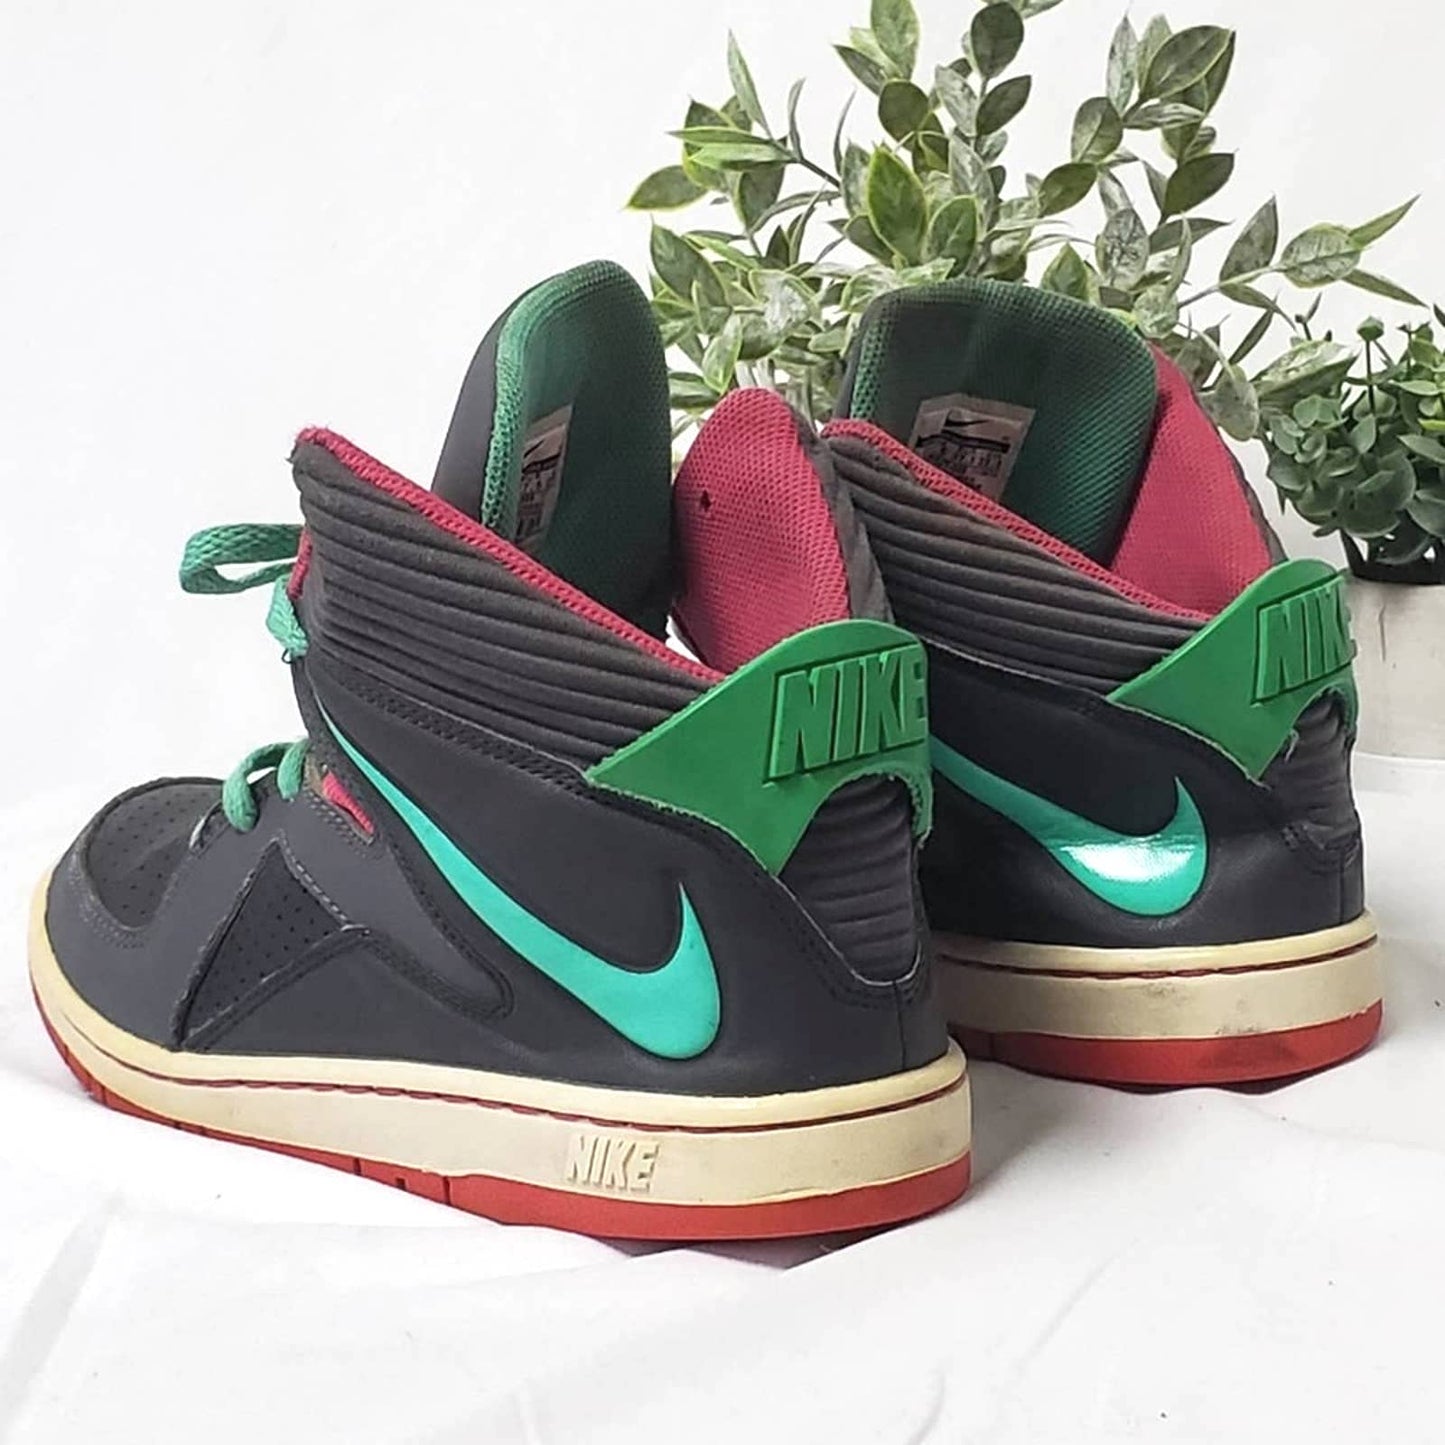 Nike ‘Court Invader’ High Top Basketball Sneakers - 5Y